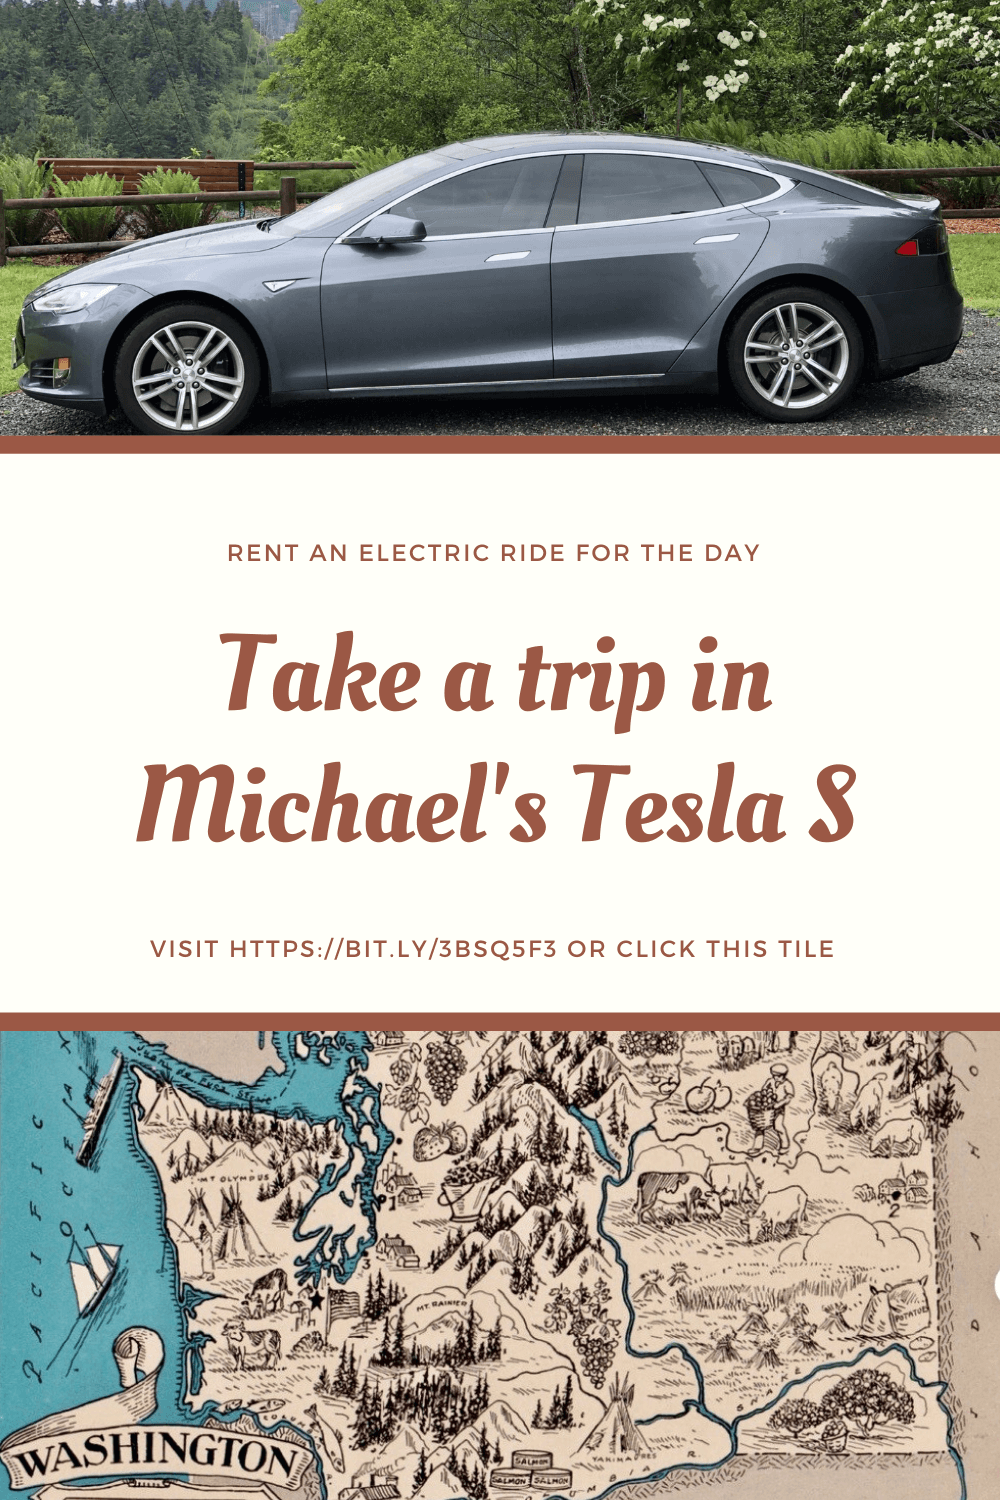 This Pinterest Tile shows a Tesla S model vehicle on a top photo and an old fashioned style map of Washington State on the bottom. The tile is a promotion for renting a Tesla.